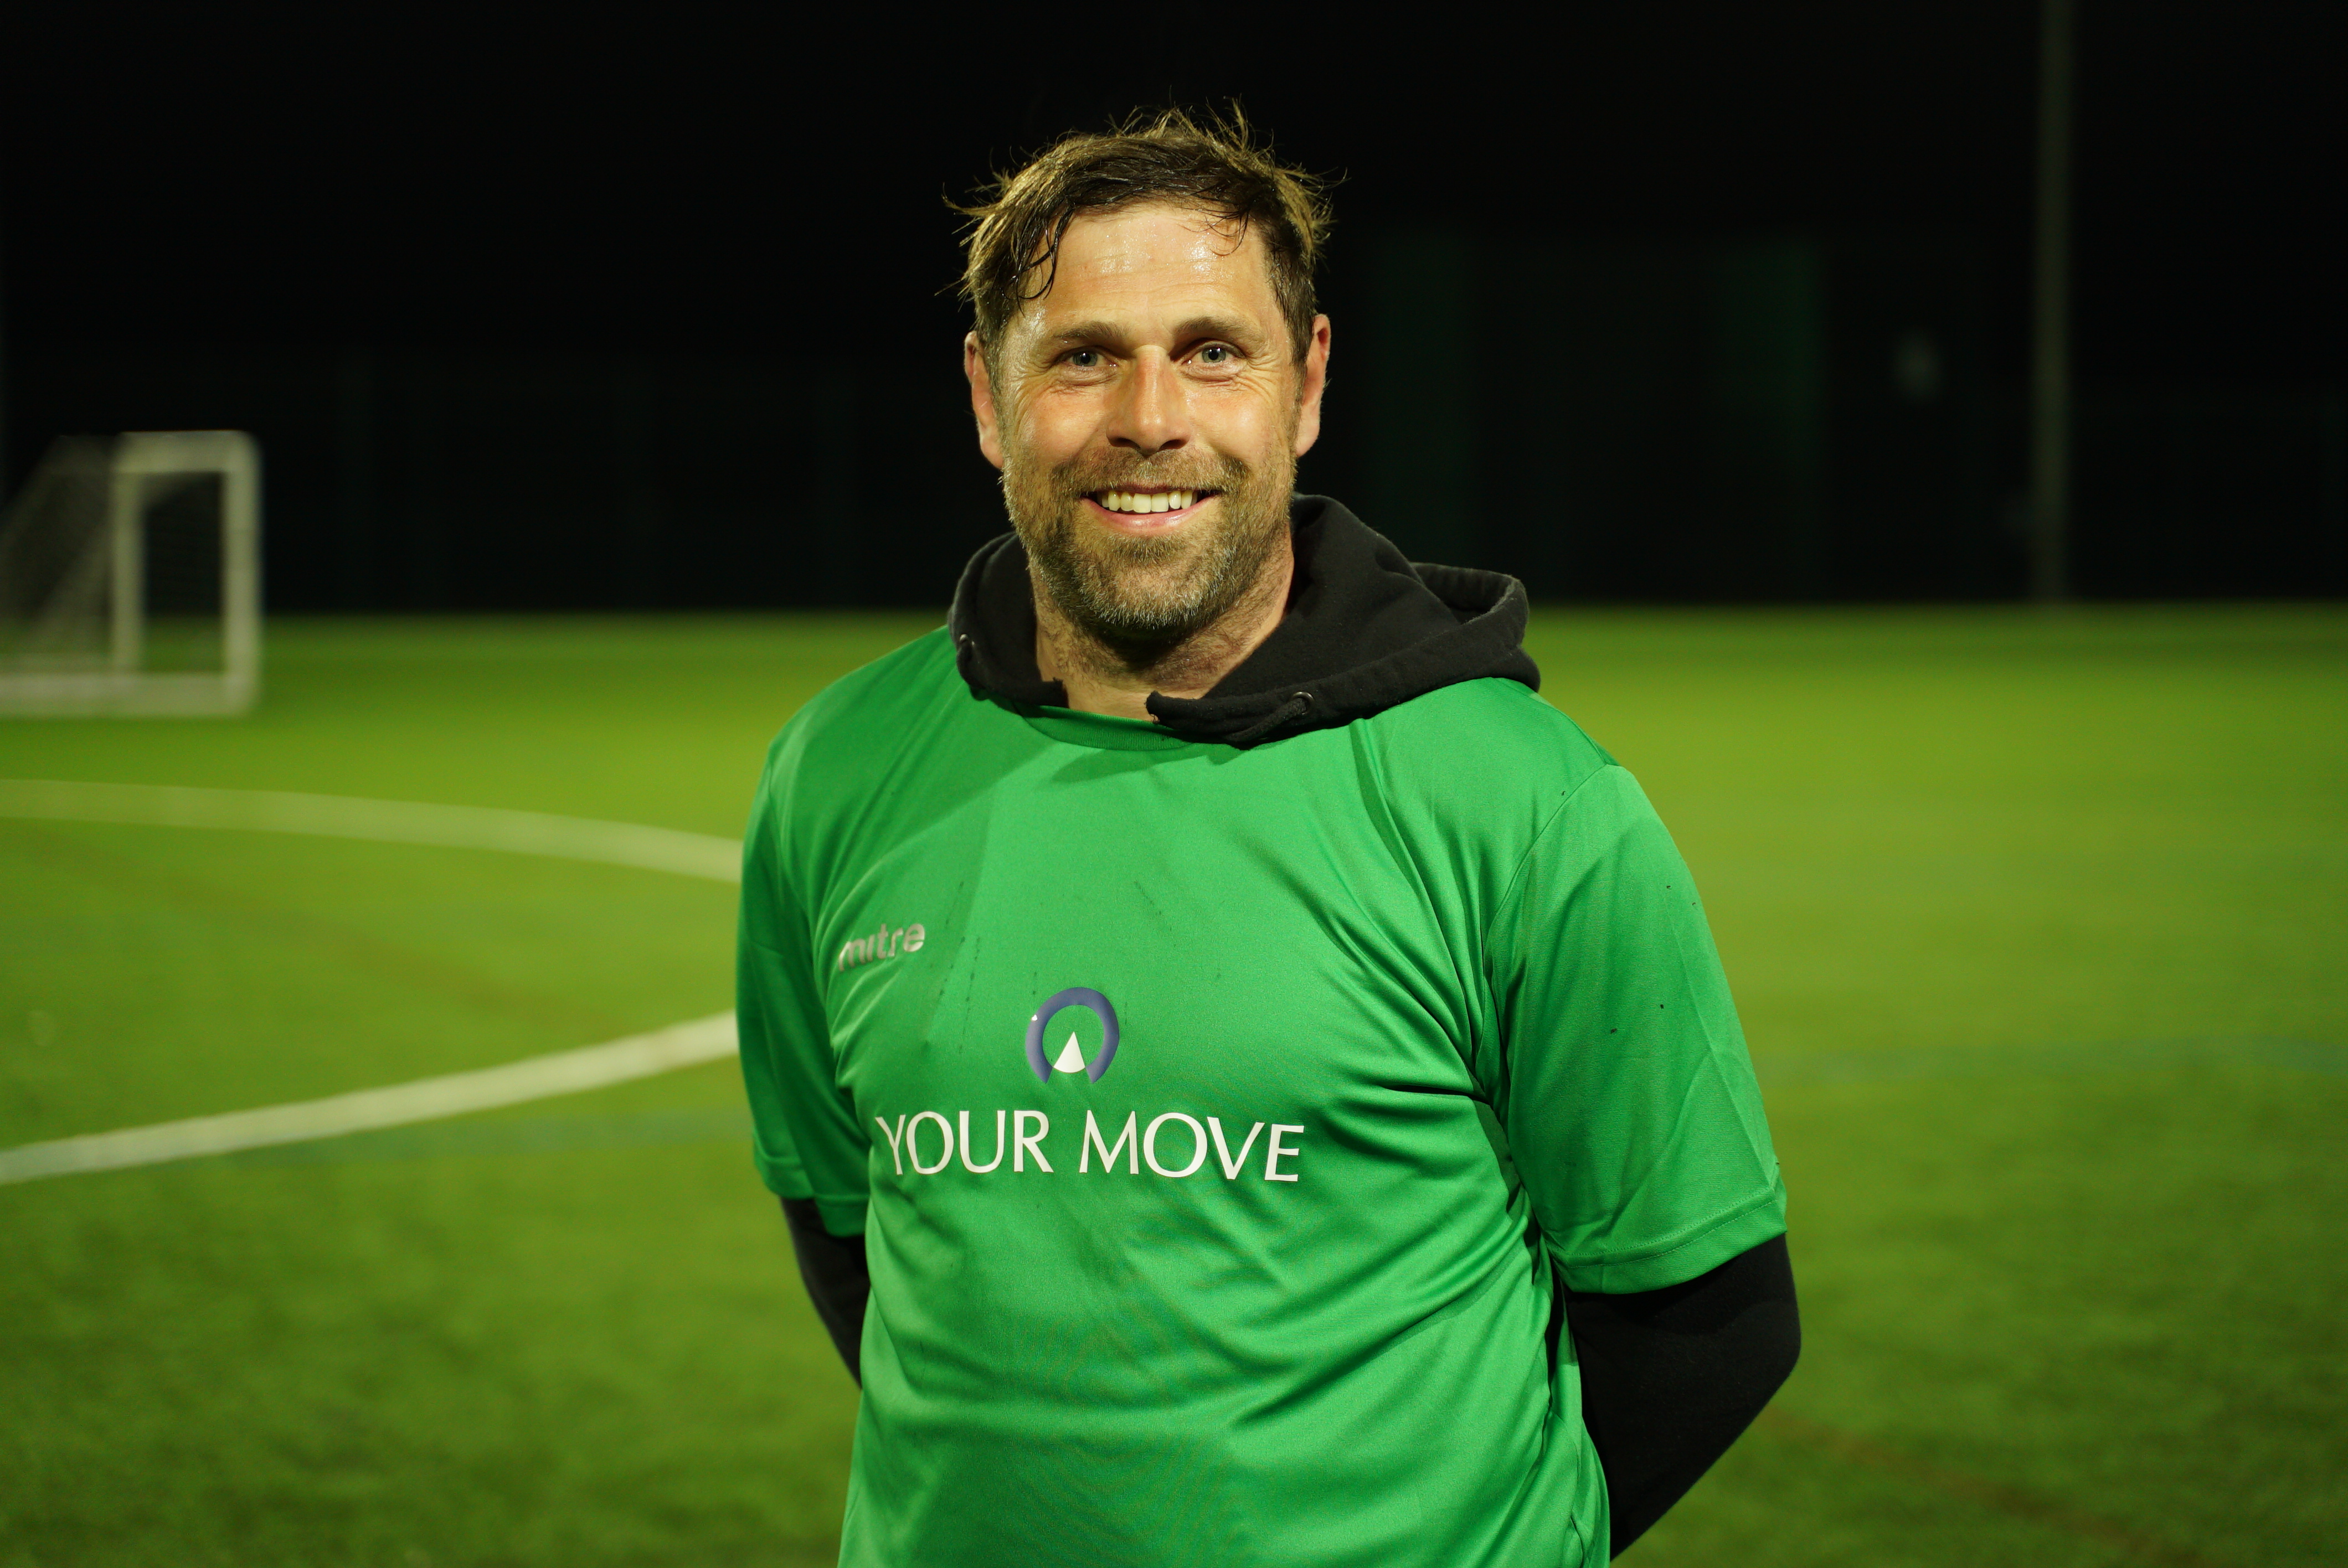 Former Norwich striker Grant Holt at an event for Your Move, promoting the ‘Your Club, Your Kit’ competition 